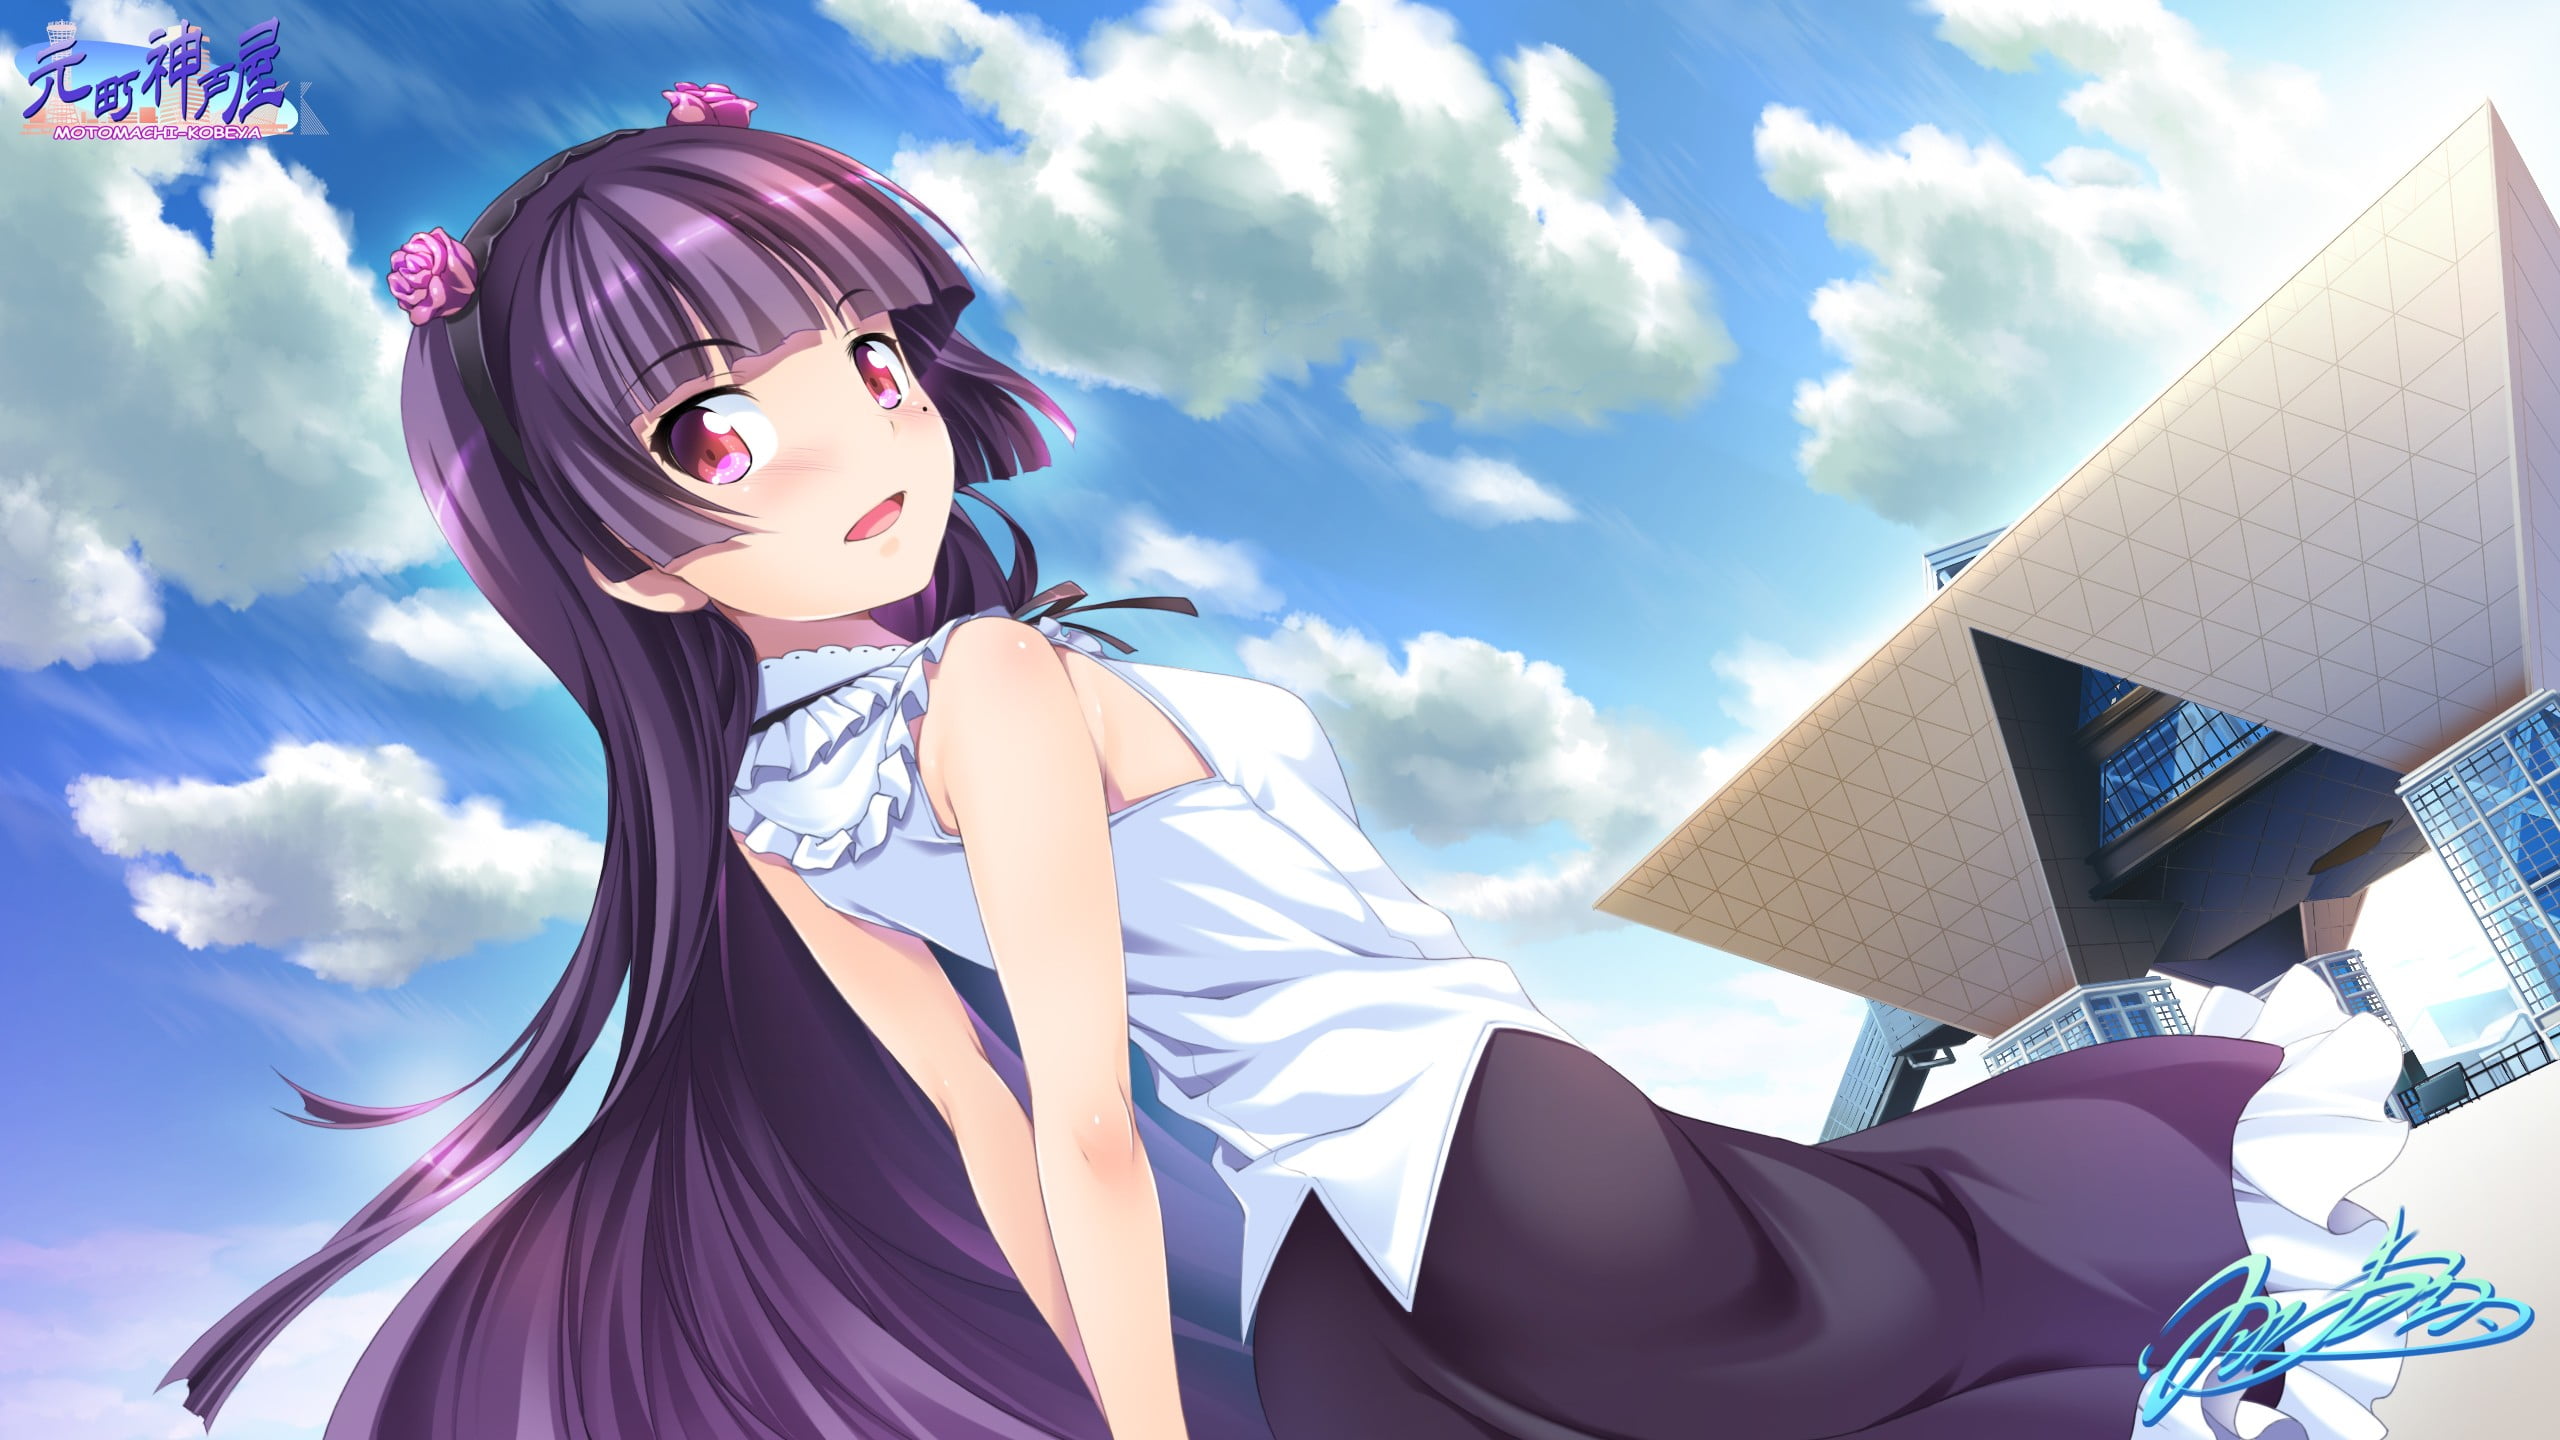 purple haired purple eyes female anime character with white sleeveless shirt and purple skirt